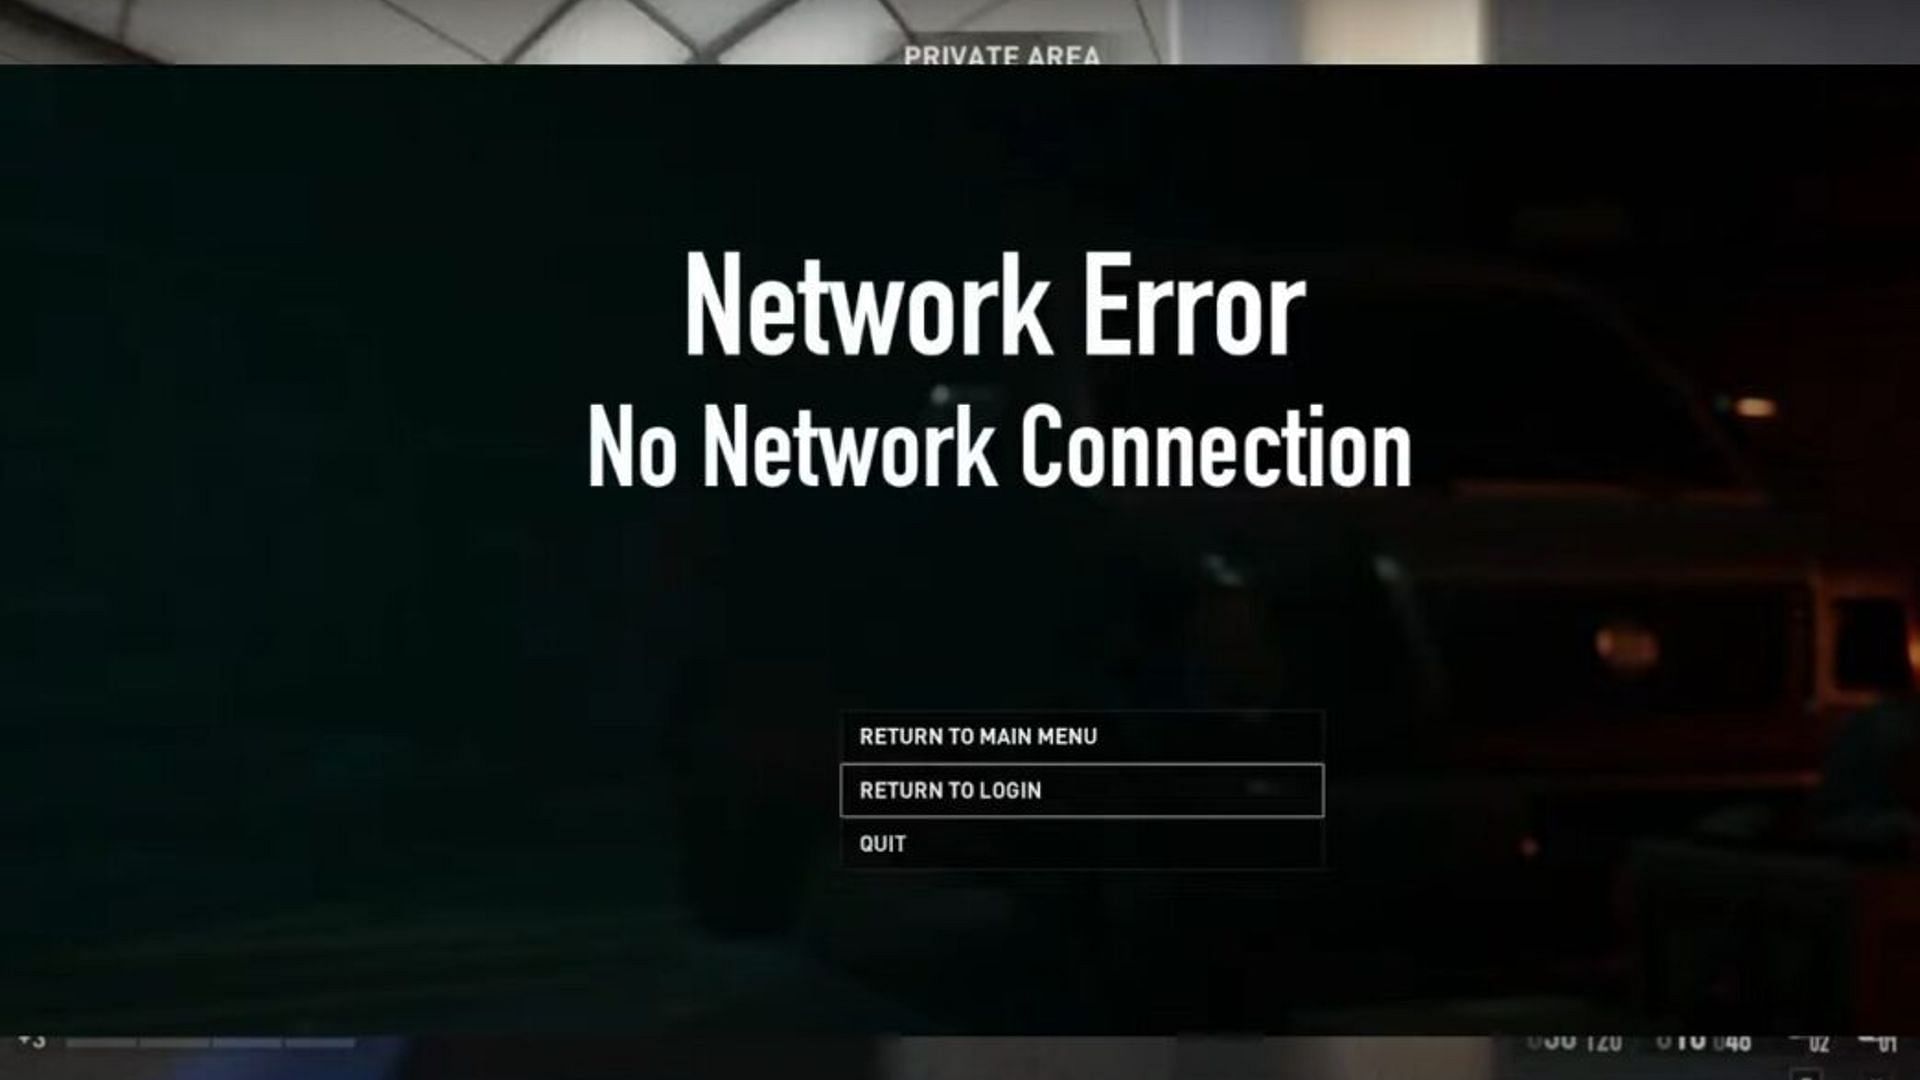 How To Fix PAYDAY 3 Login Not Working 